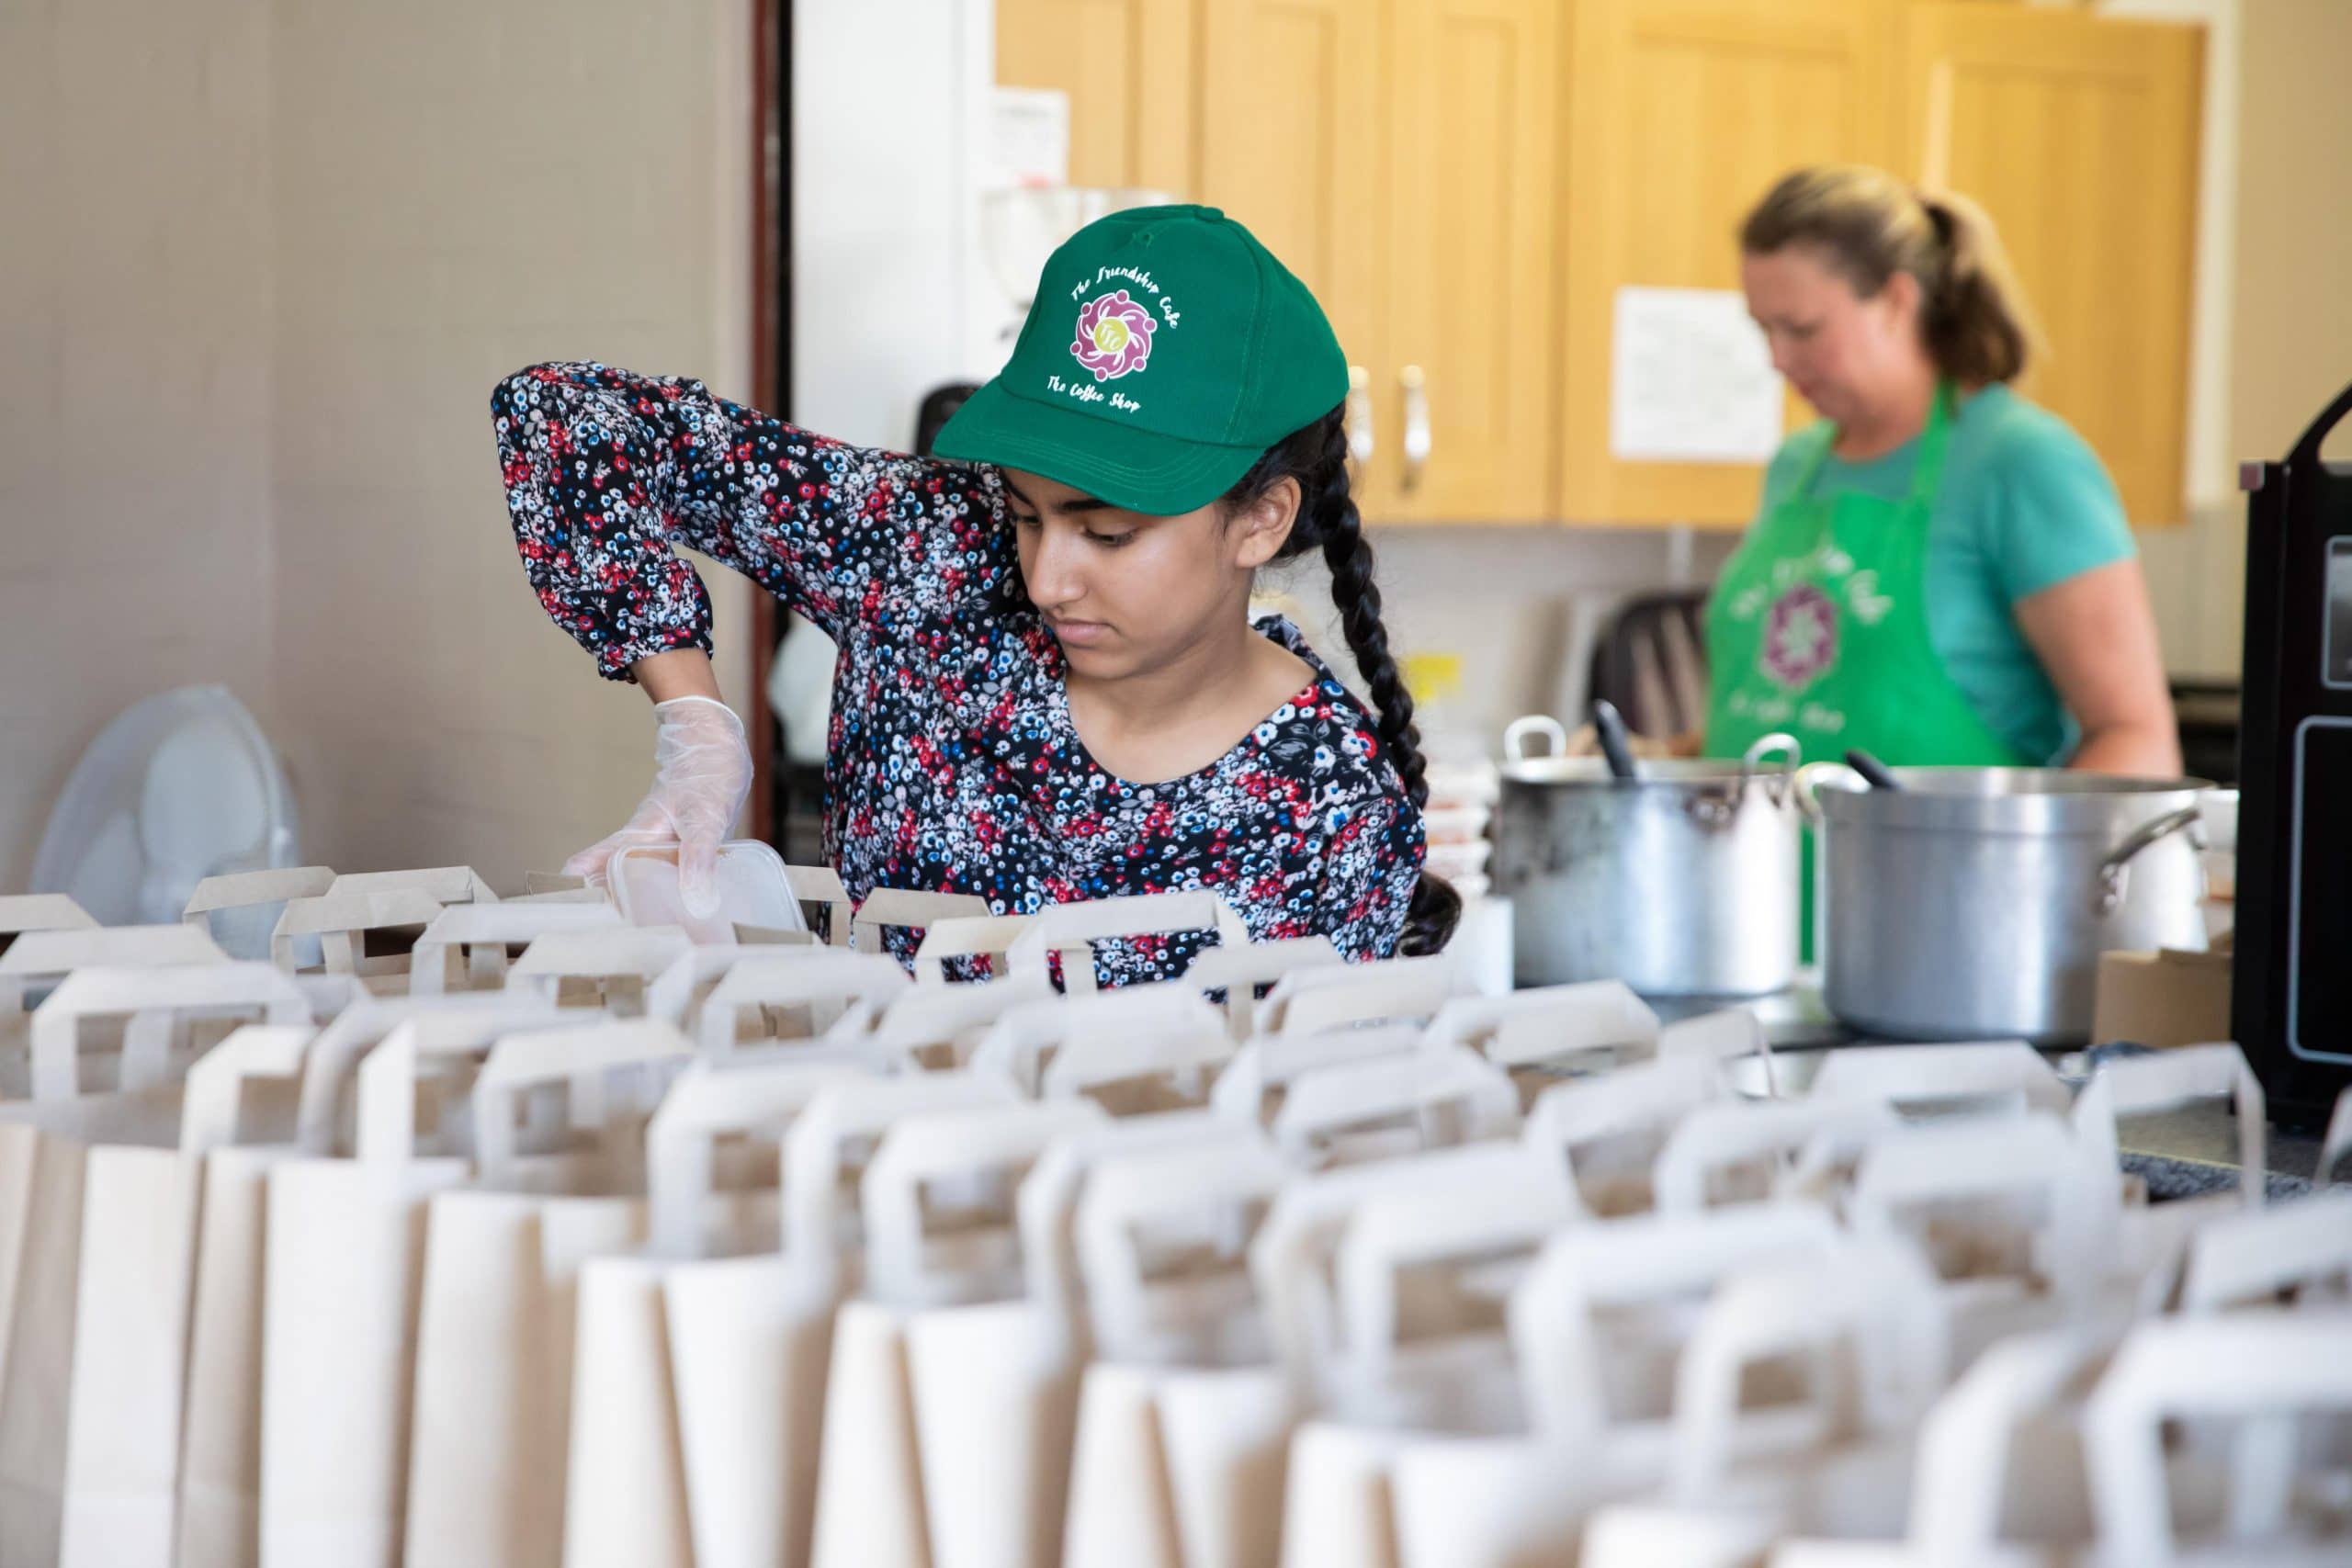 A picture of a girl in a green cap putting food in paper bags